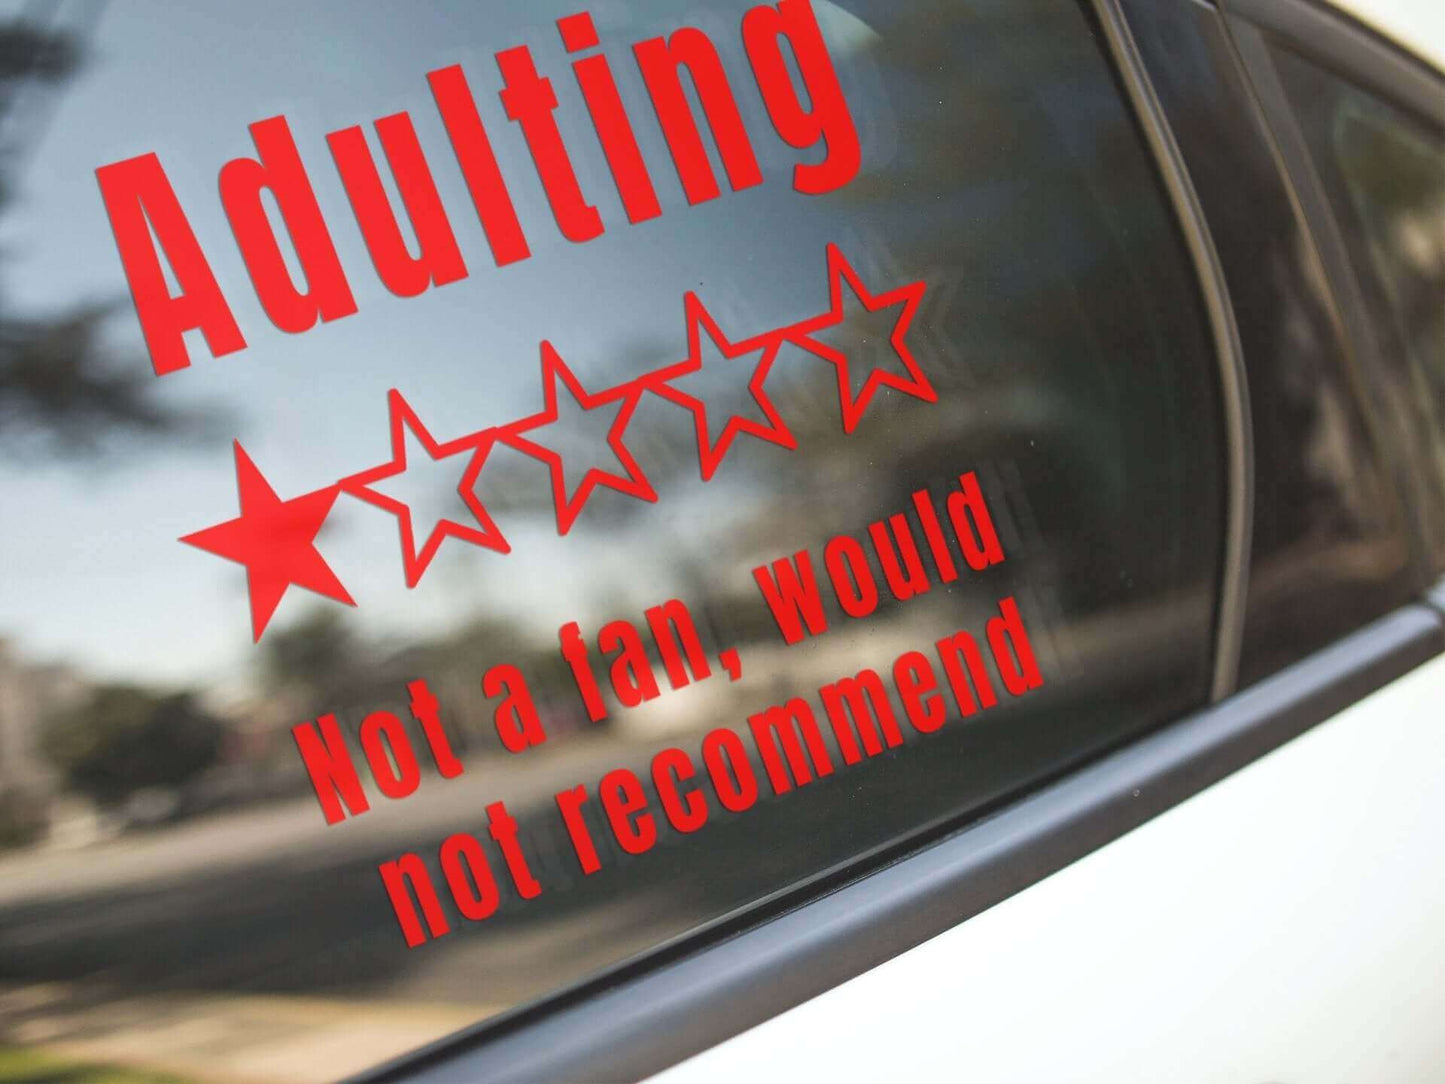 Adulting. Not a fan, would not recommend - Vinyl decal adult adulting adulting not a fan Die cut stickers funny sticker meme sticker sticker stickers vinyl sticker water proof sticker would not recommend